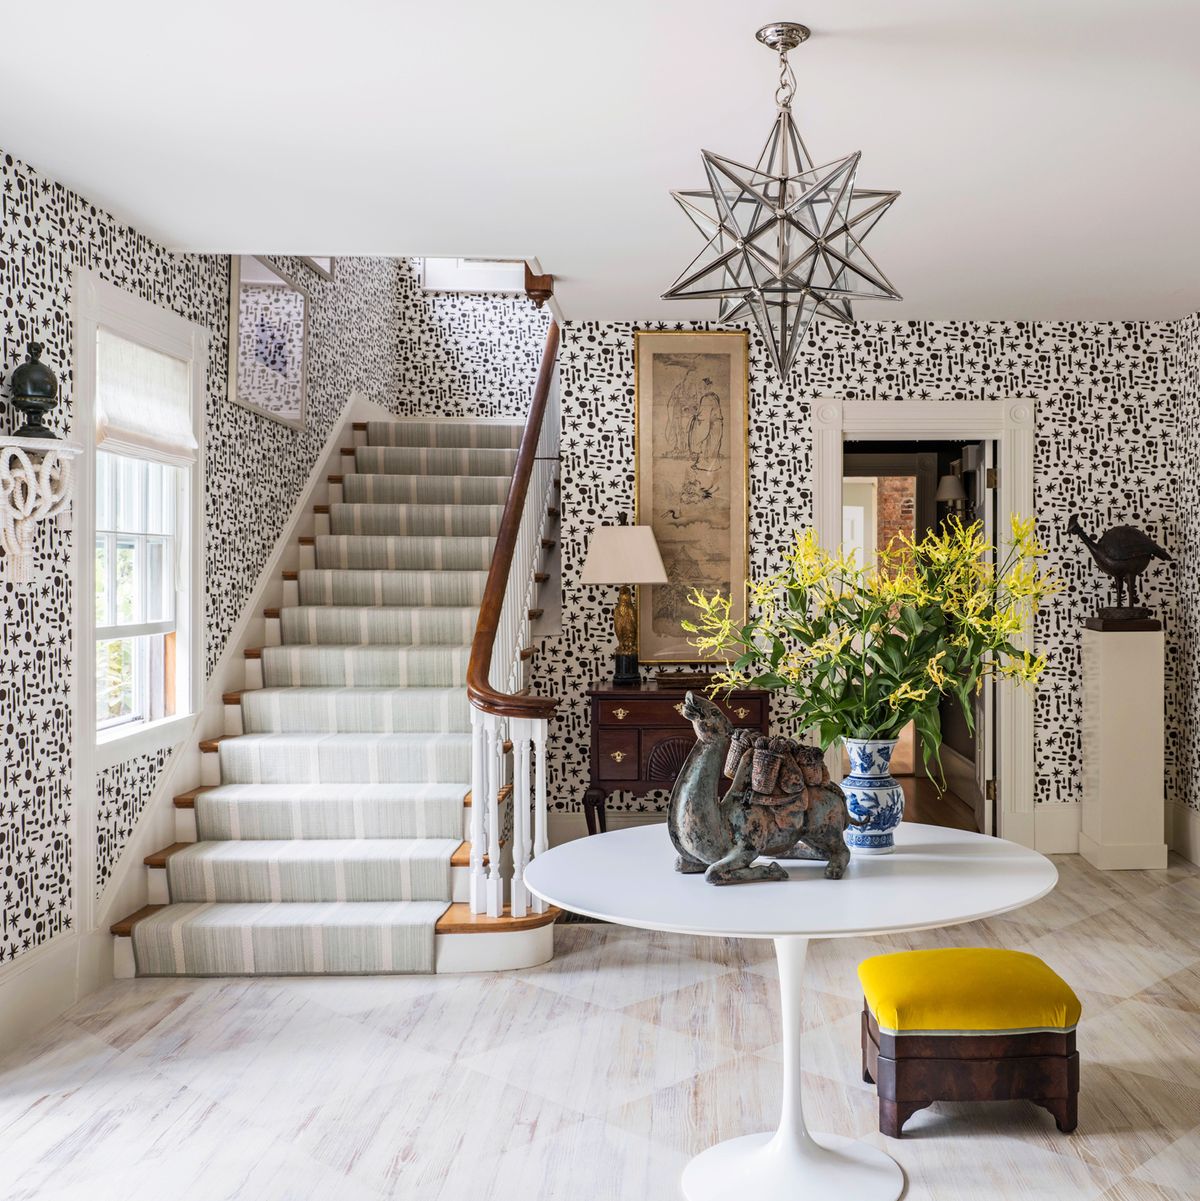 18 Staircase Design Ideas For Every Style Of Home